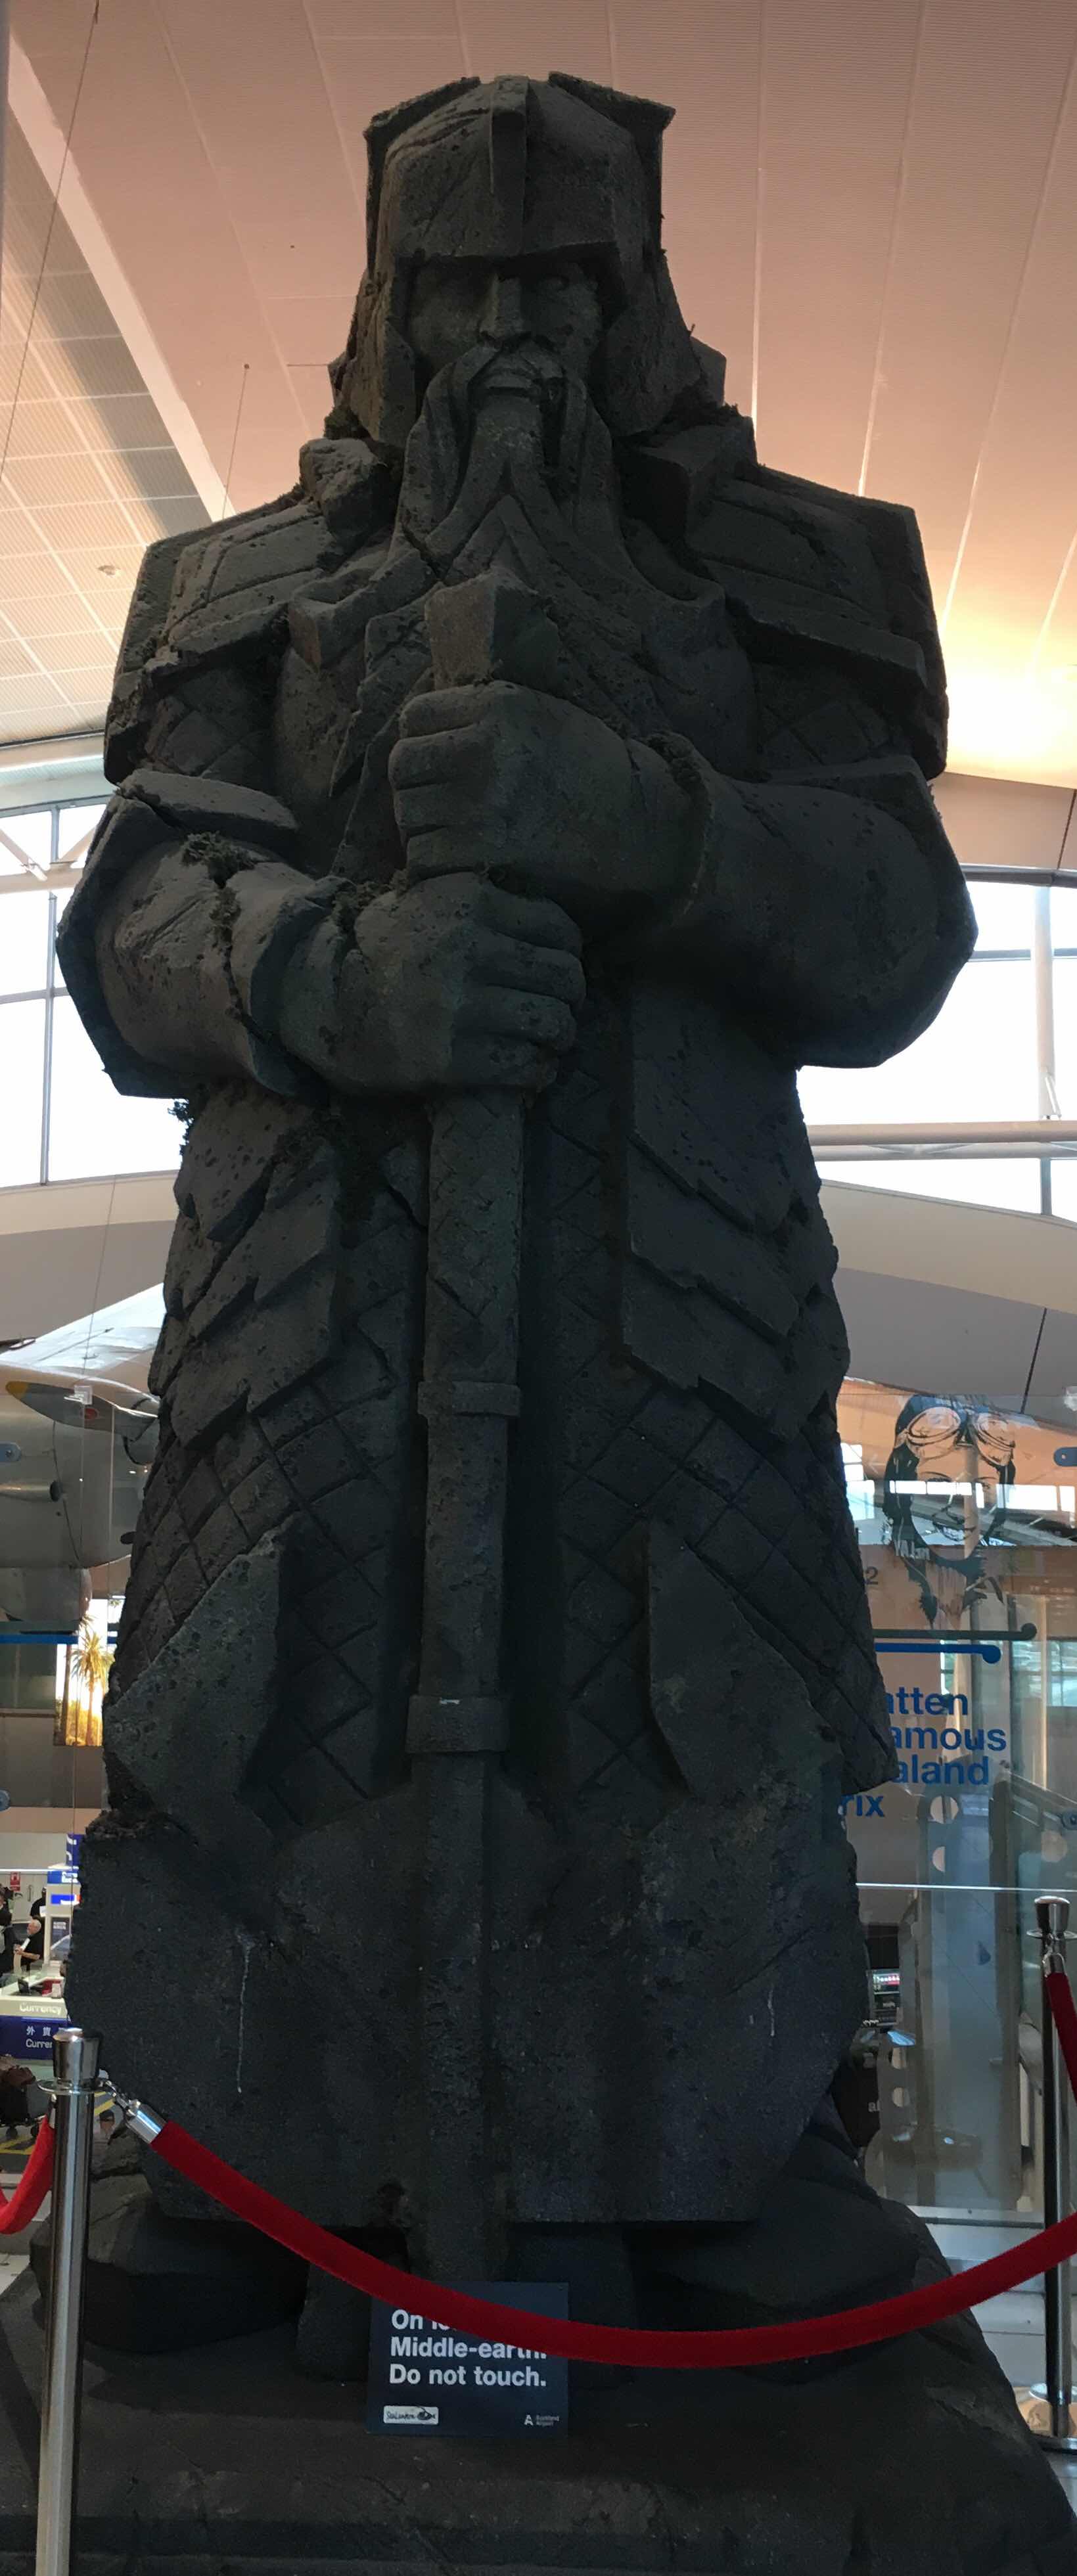 Auckland airport Lord of the Rings statue